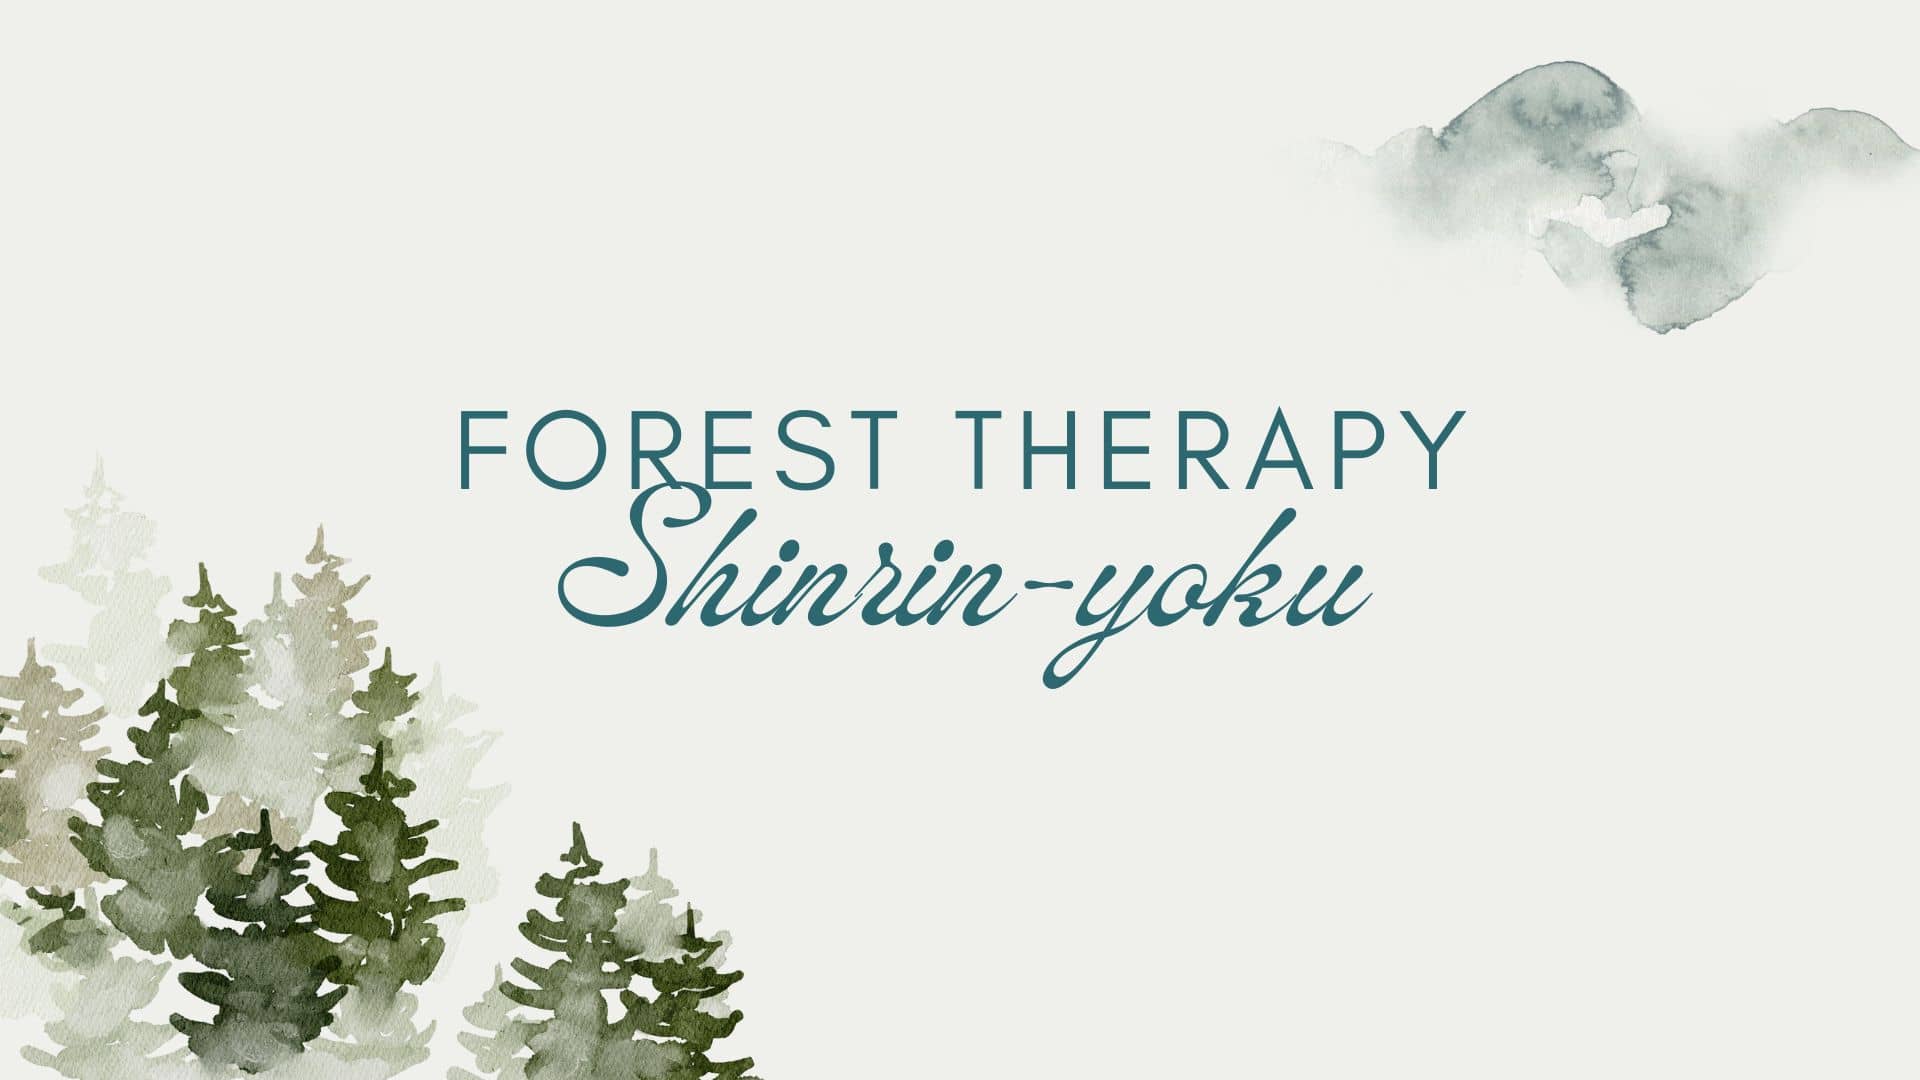 Forest Therapy (Shinrin-yoku)